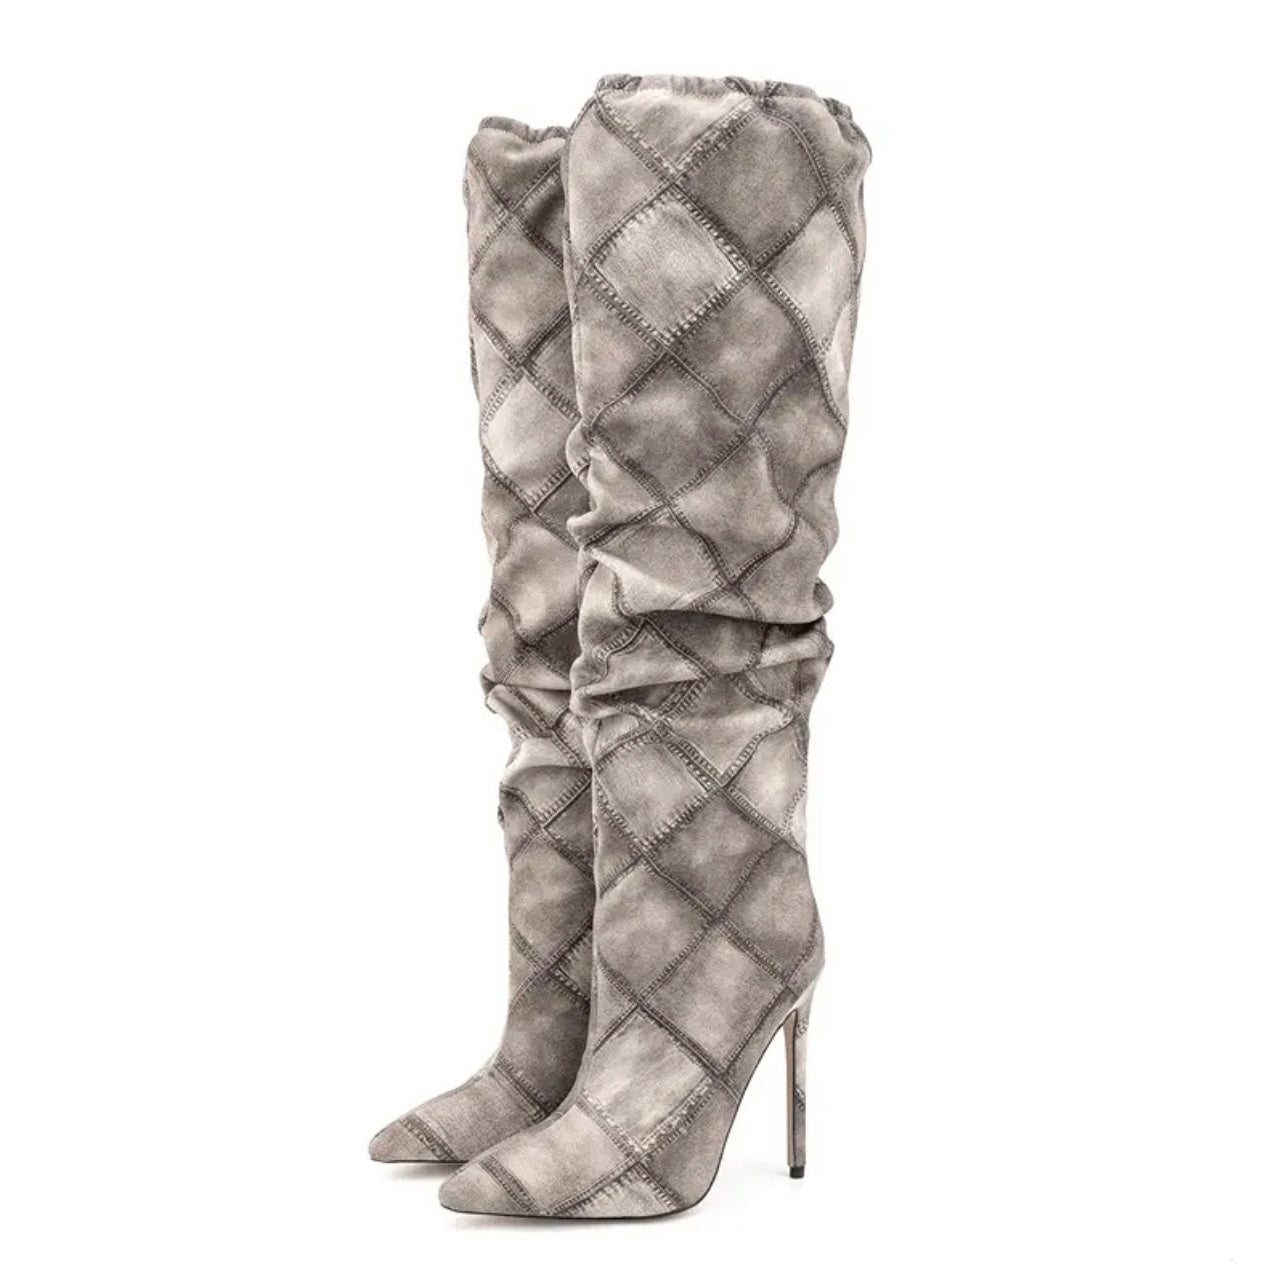 Staying Fabulous Knee High Boots Comes In Other Gorgeous Colors (Preorder Ships 9/30-10/5)